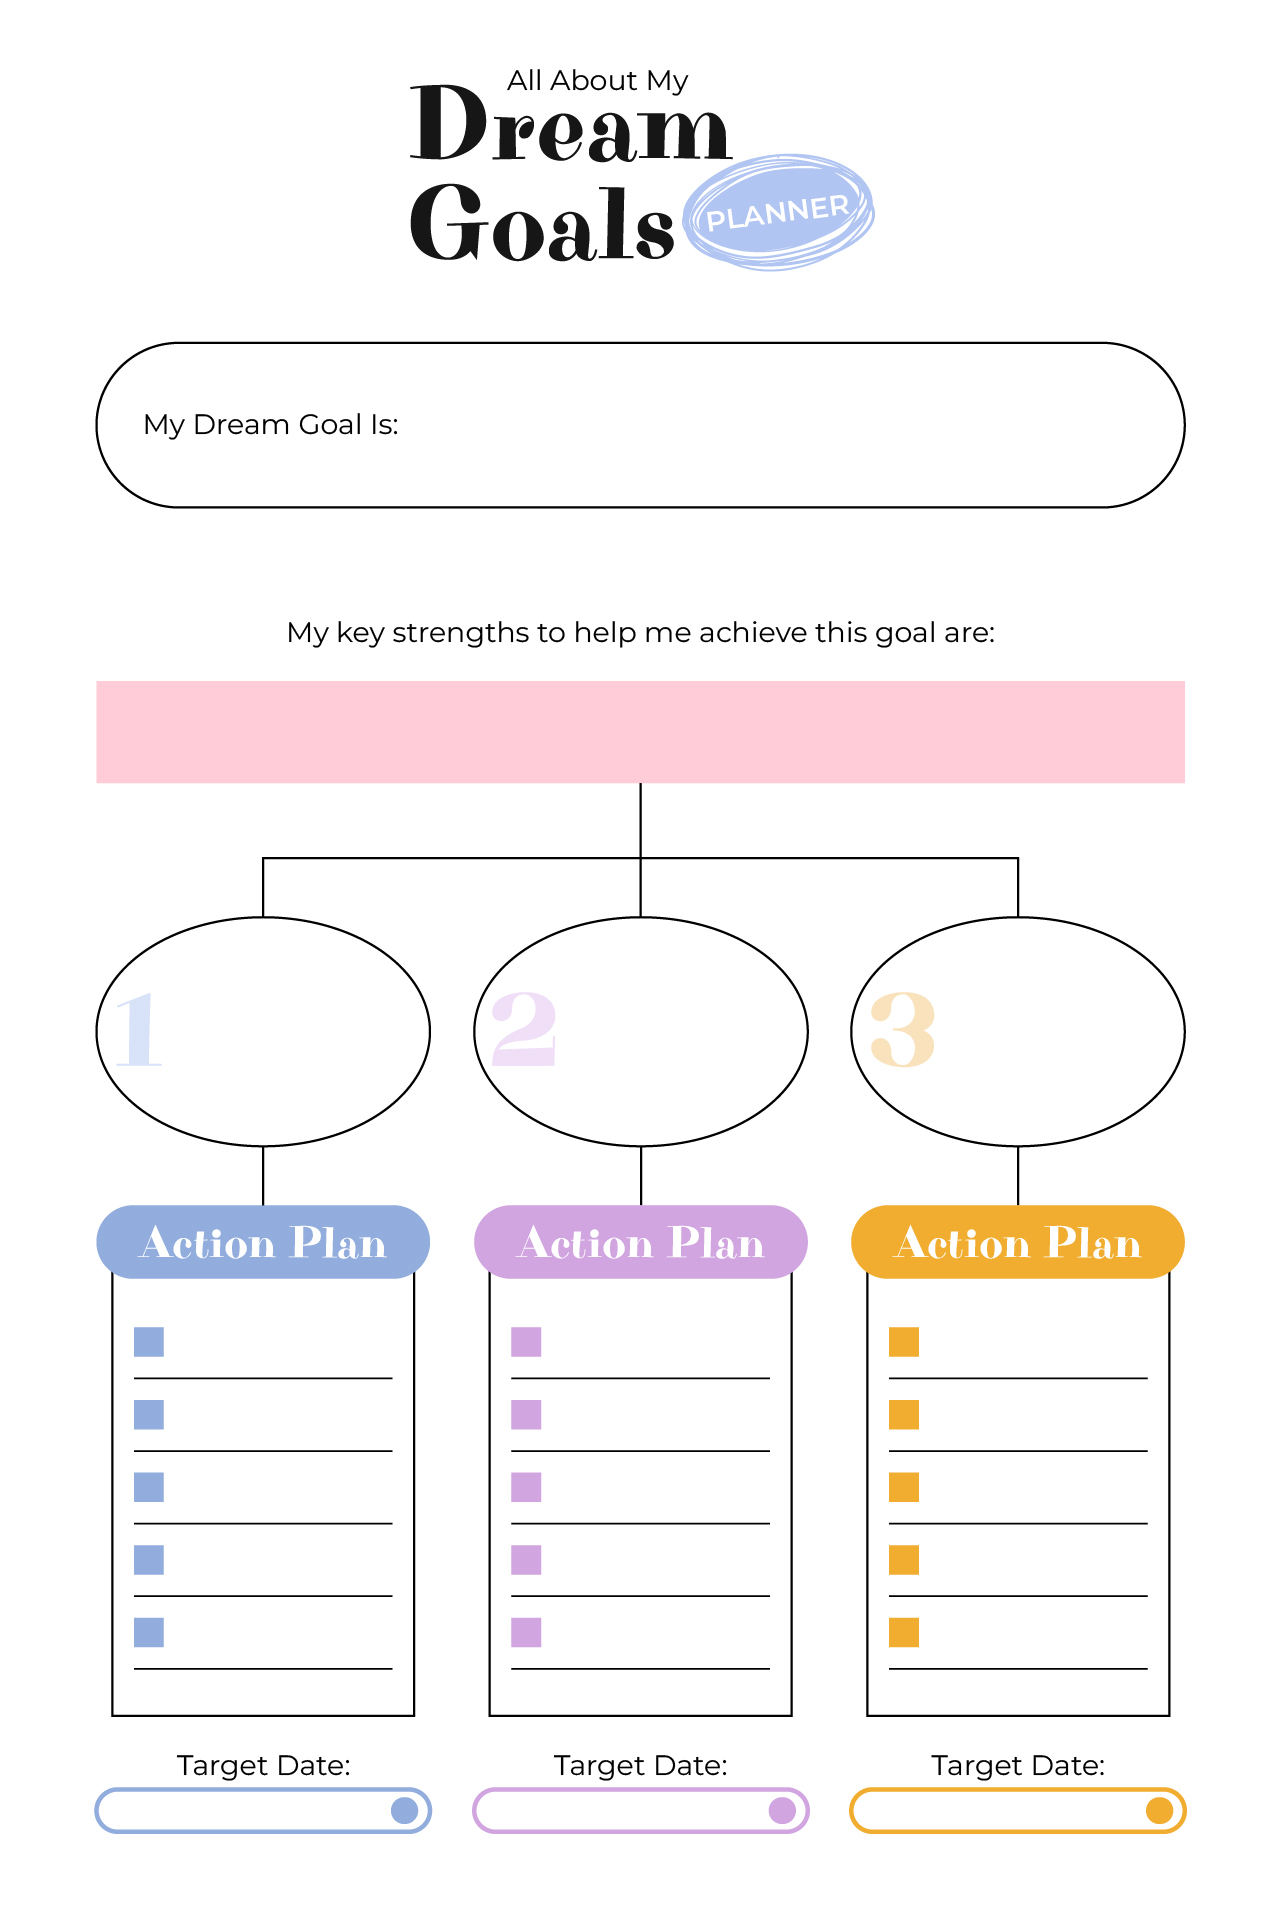 All About My Dreams And Goals Printable Planner